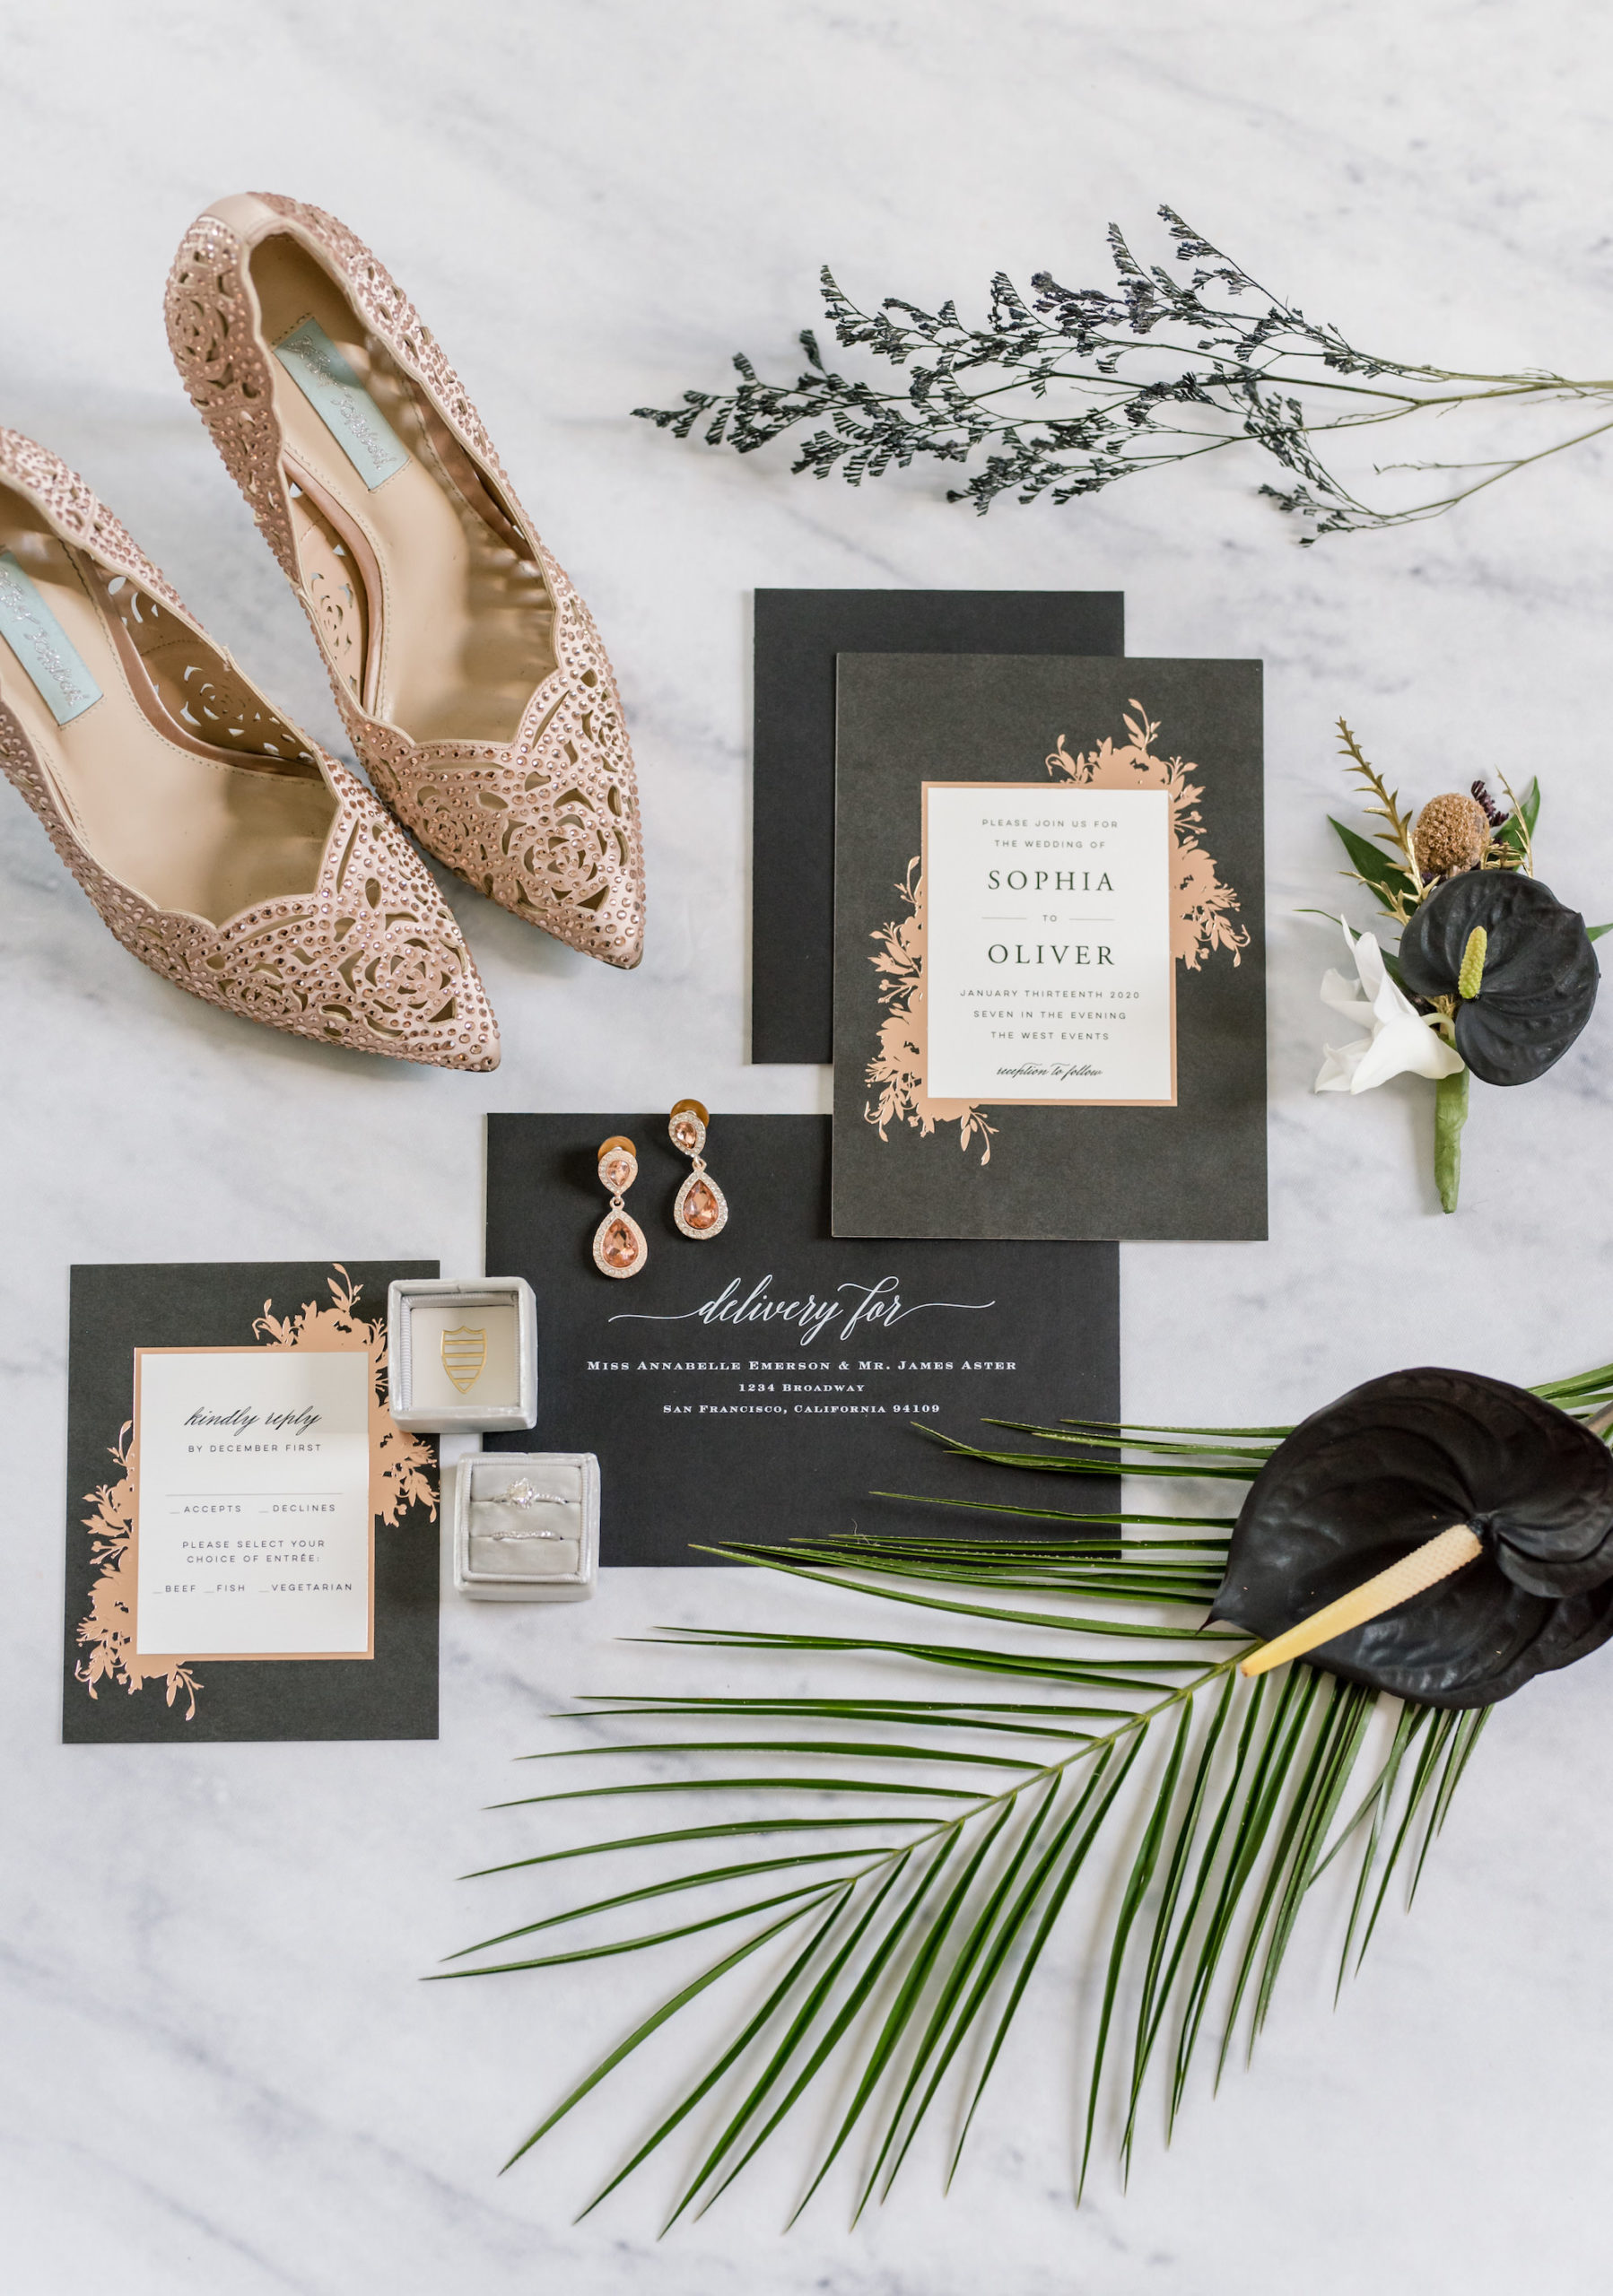 Luxe Romantic Black and Rose Gold Wedding Invitation Suite, Rose Gold Pointed Toe Wedding Shoes | Tampa Bay Wedding Planner Elegant Affairs by Design